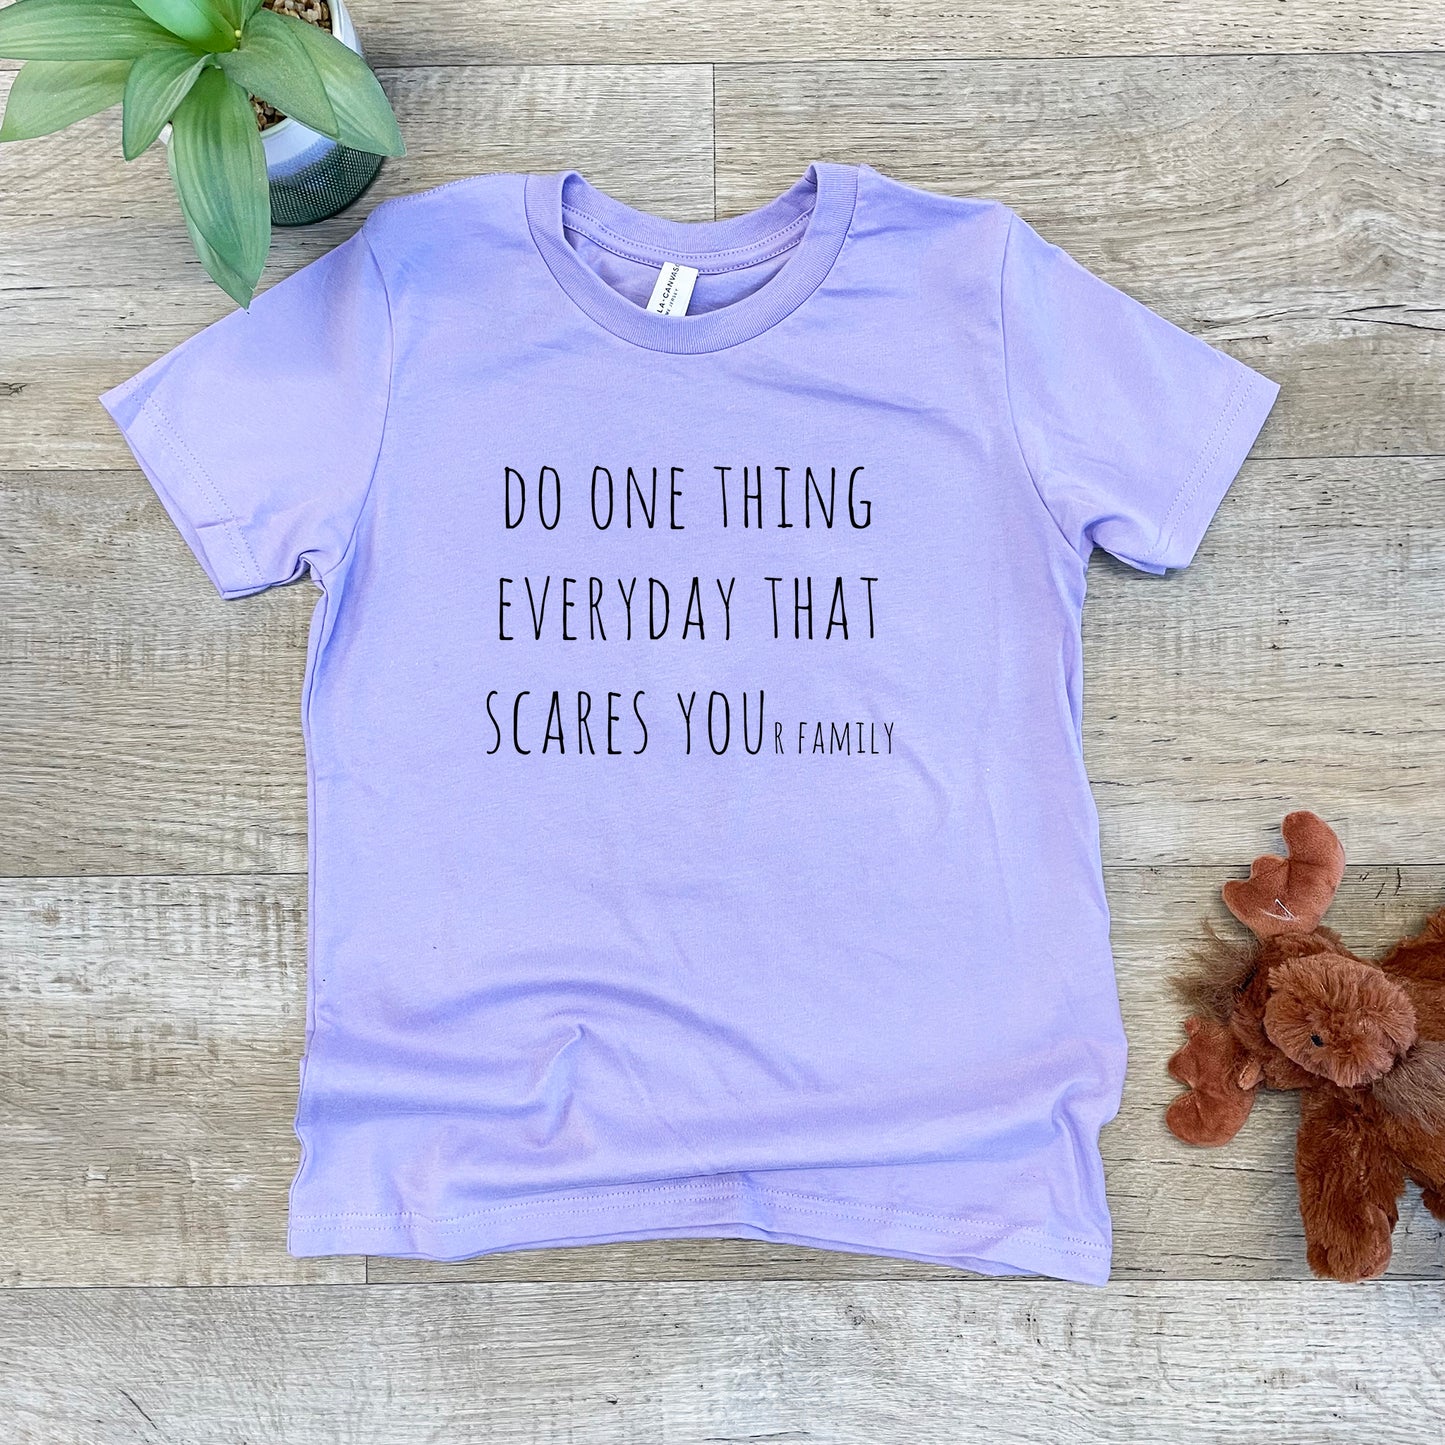 Do One Thing Every Day That Scares Your Family - Kid's Tee - Columbia Blue or Lavender